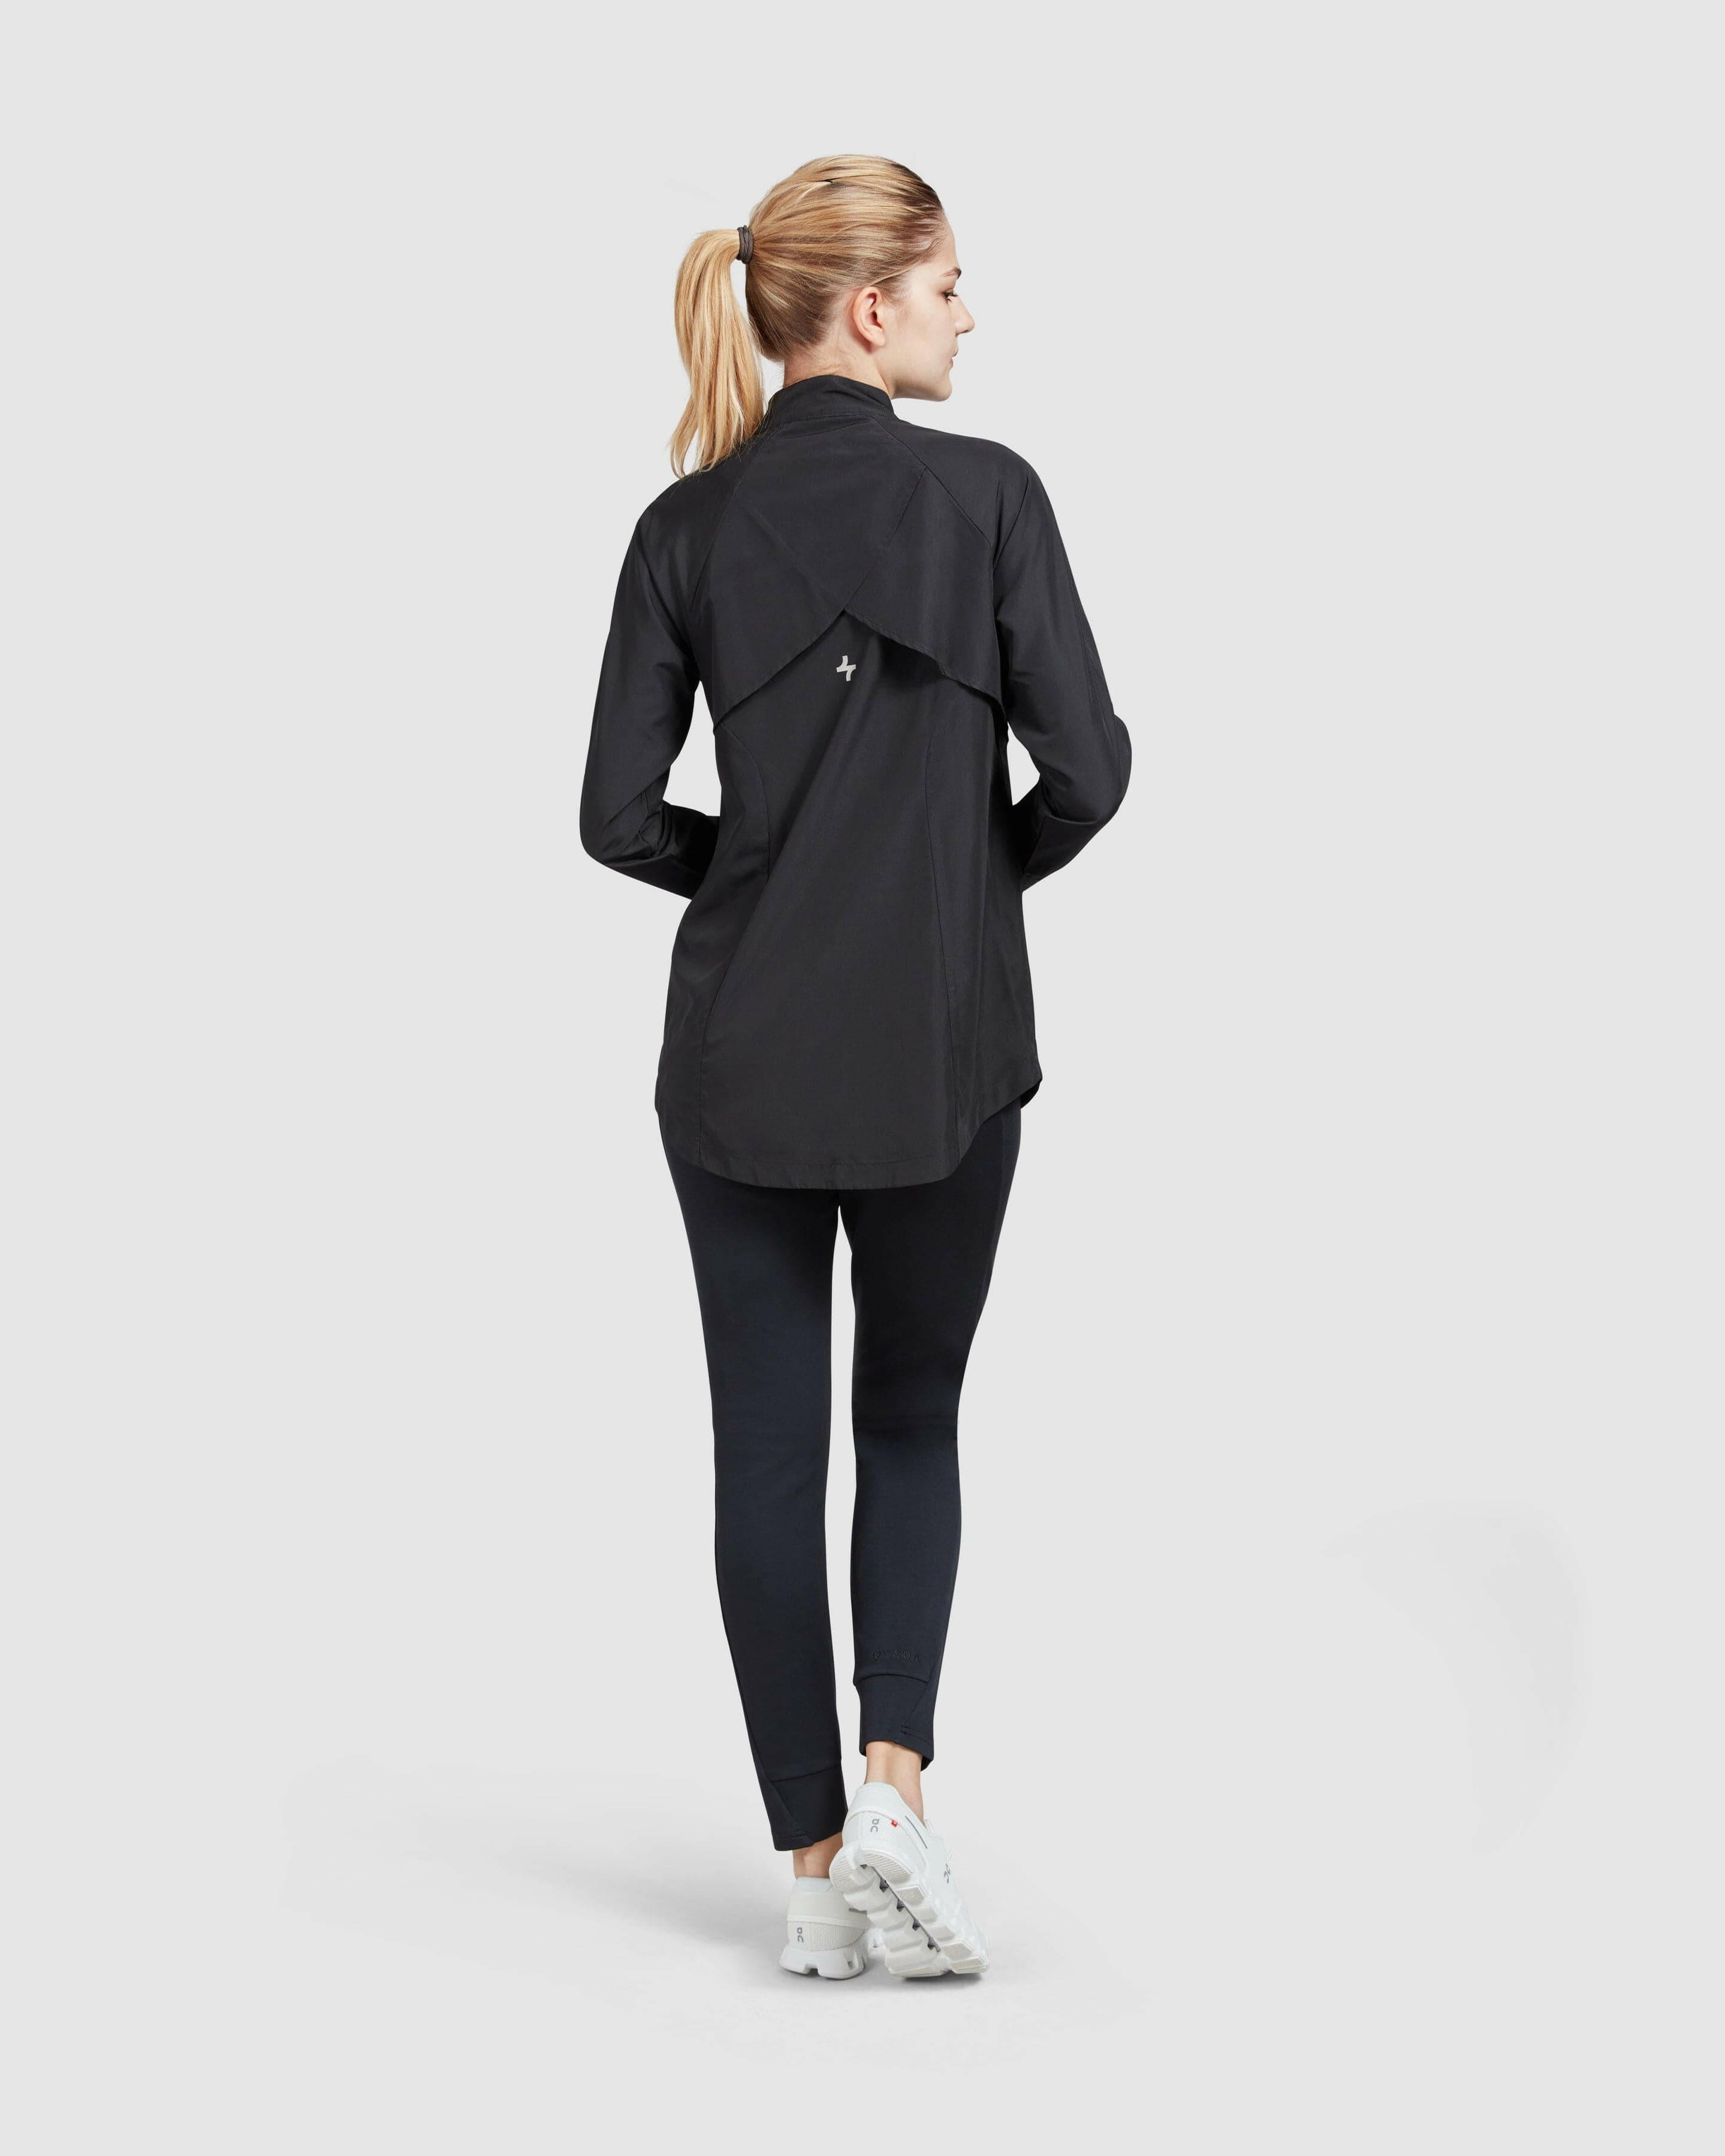 Back view of a model standing poised in a casual black long-sleeve FLY JACKET by Qynda and dark leggings paired with white sneakers, against a plain light background.